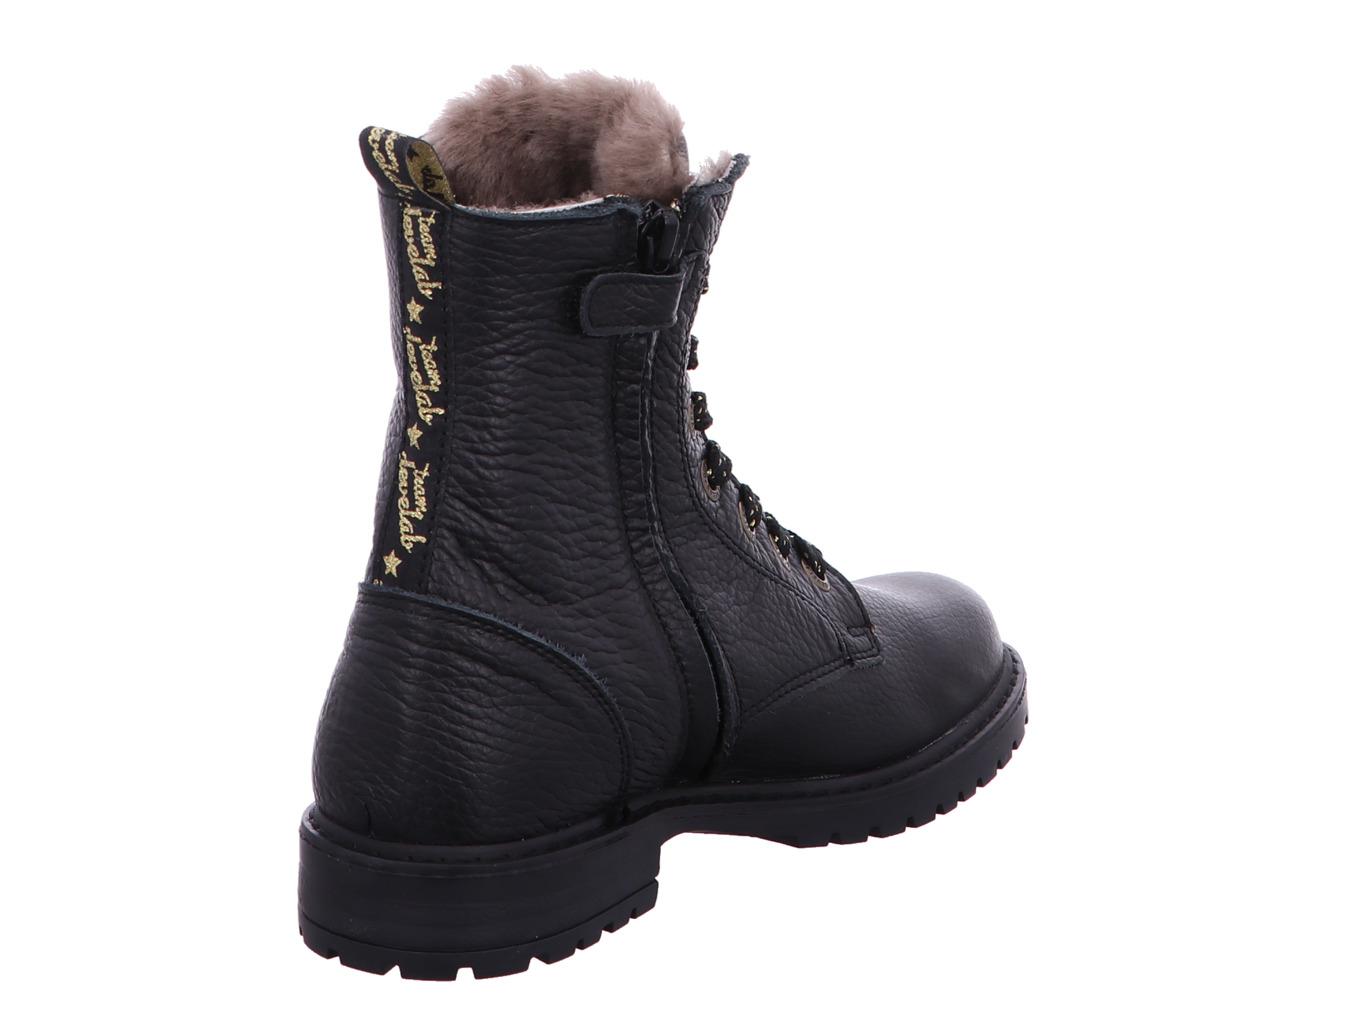 develab_girls_mid_boot_laces_42846_922_2136